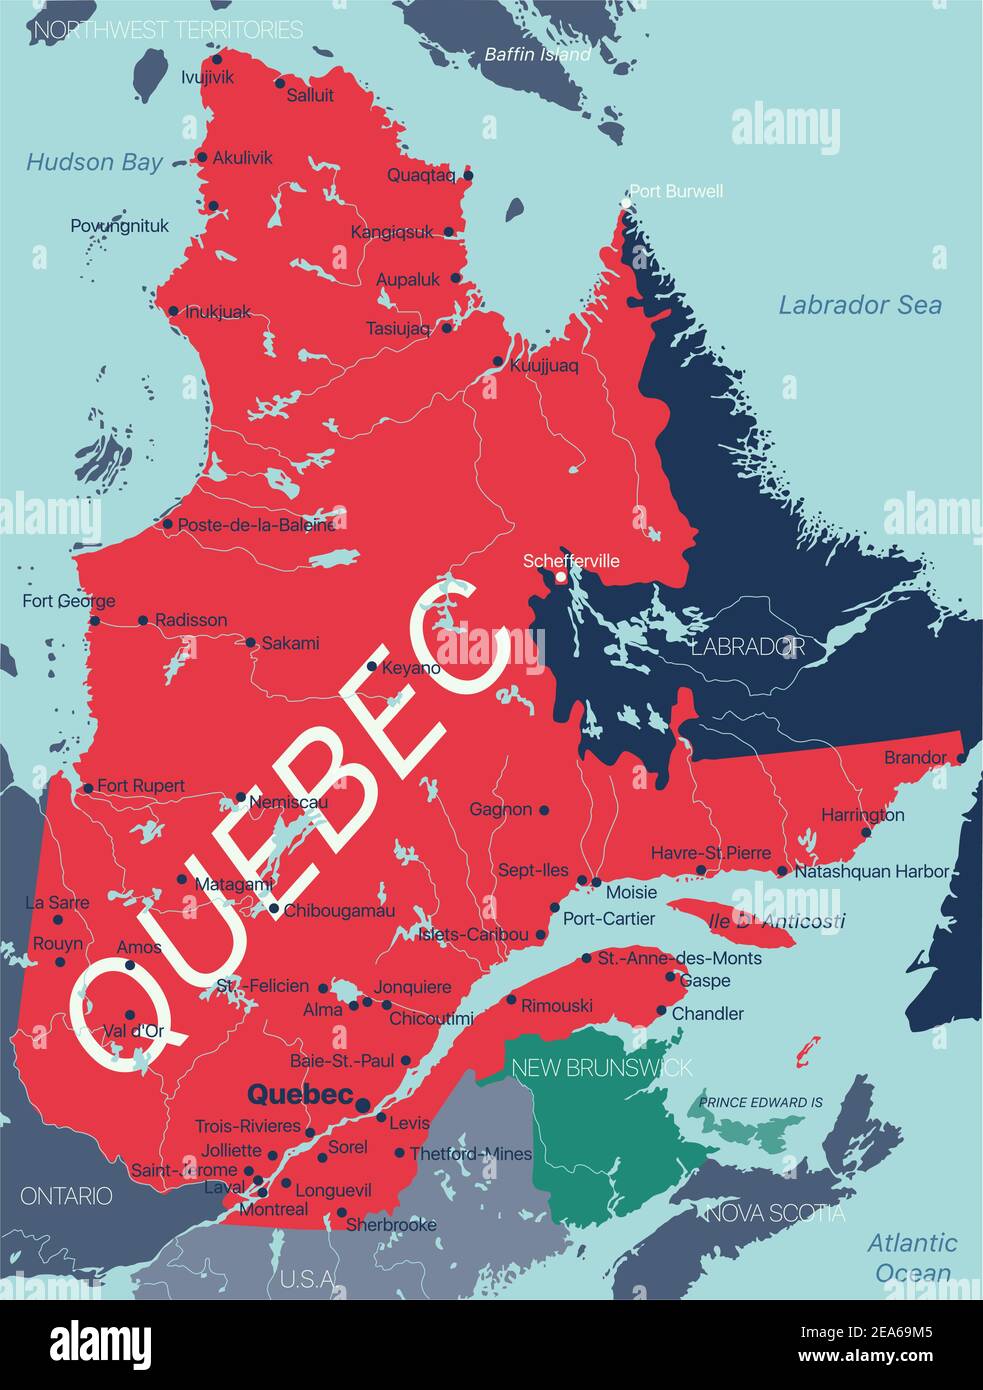 Quebec Province Vector Editable Map Of The Canada With Capital National Borders Cities And Towns Rivers And Lakes Vector Eps 10 File 2EA69M5 